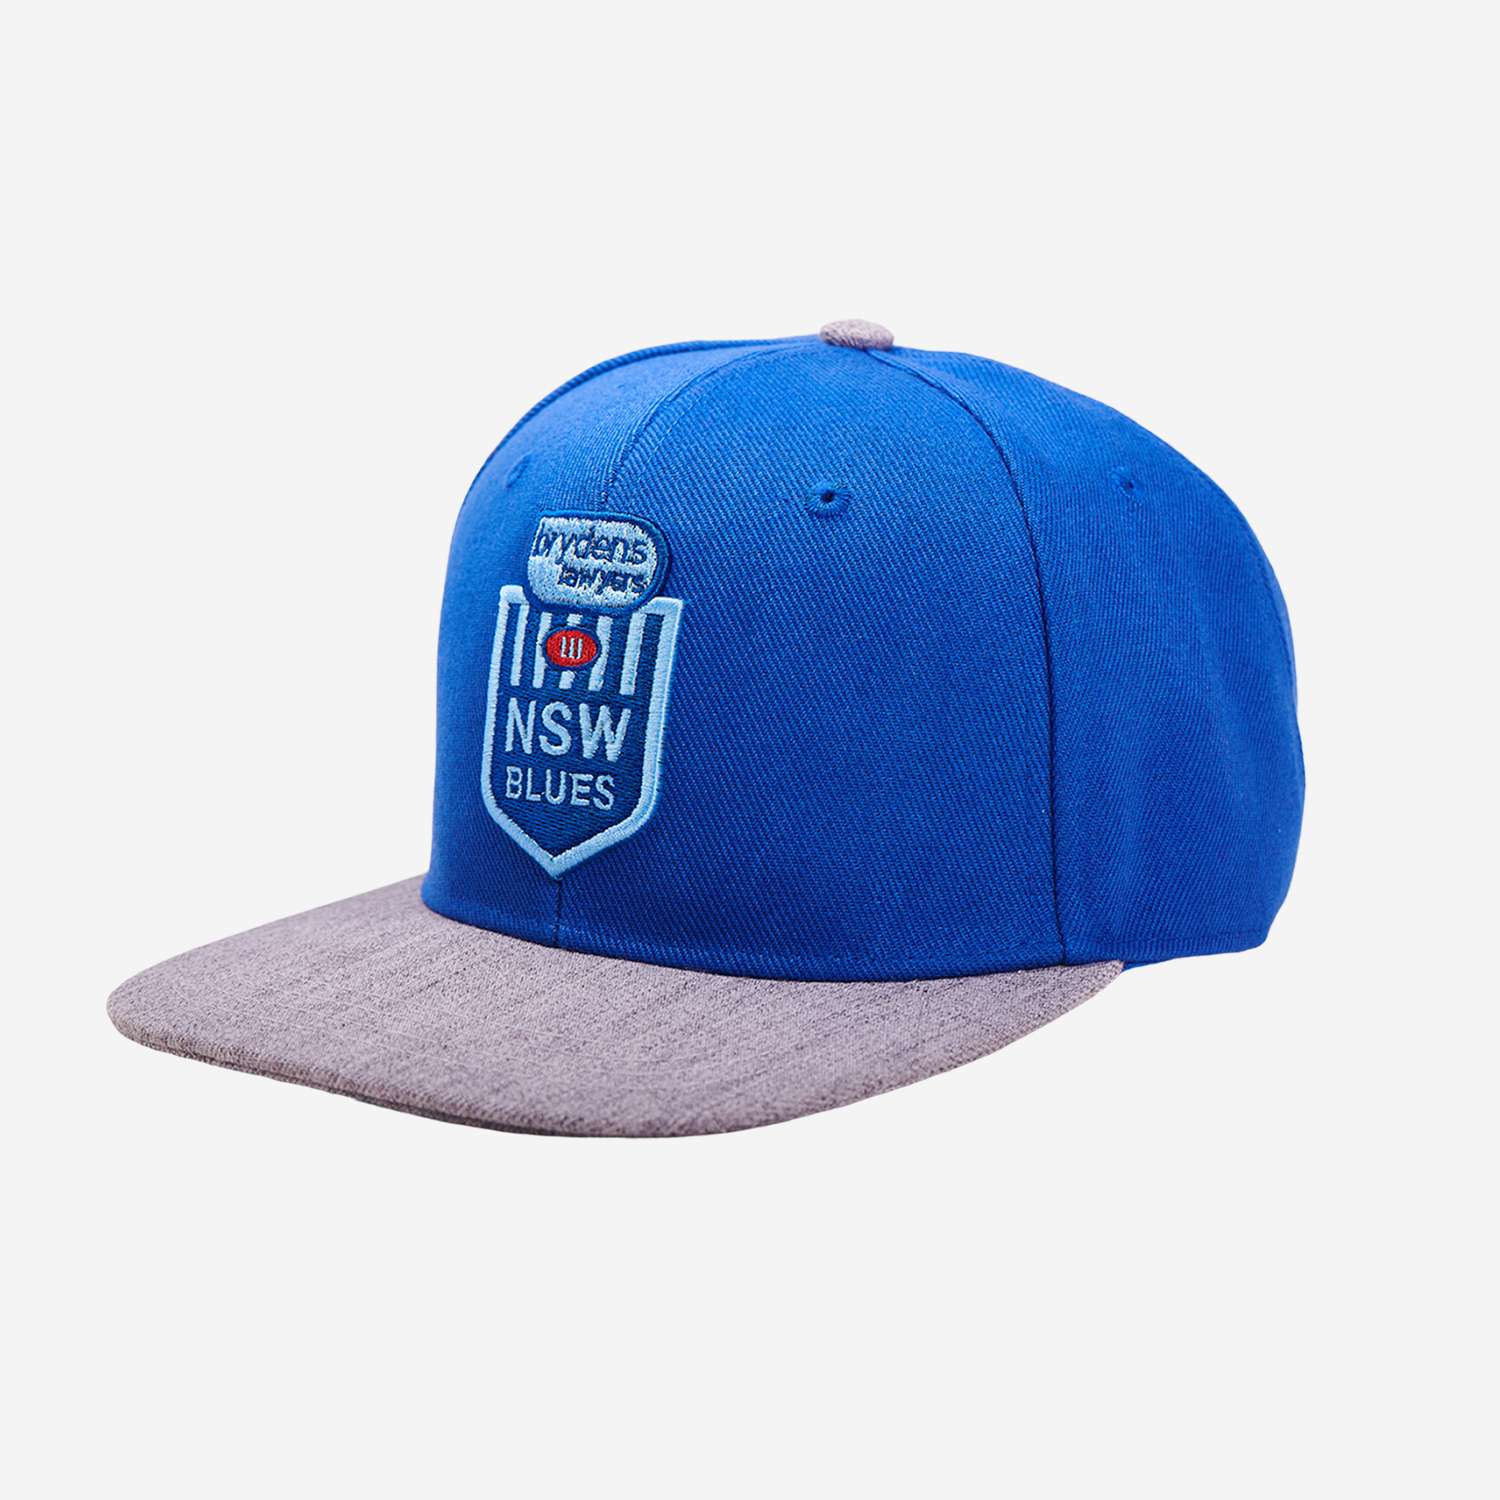 NSW Snap back